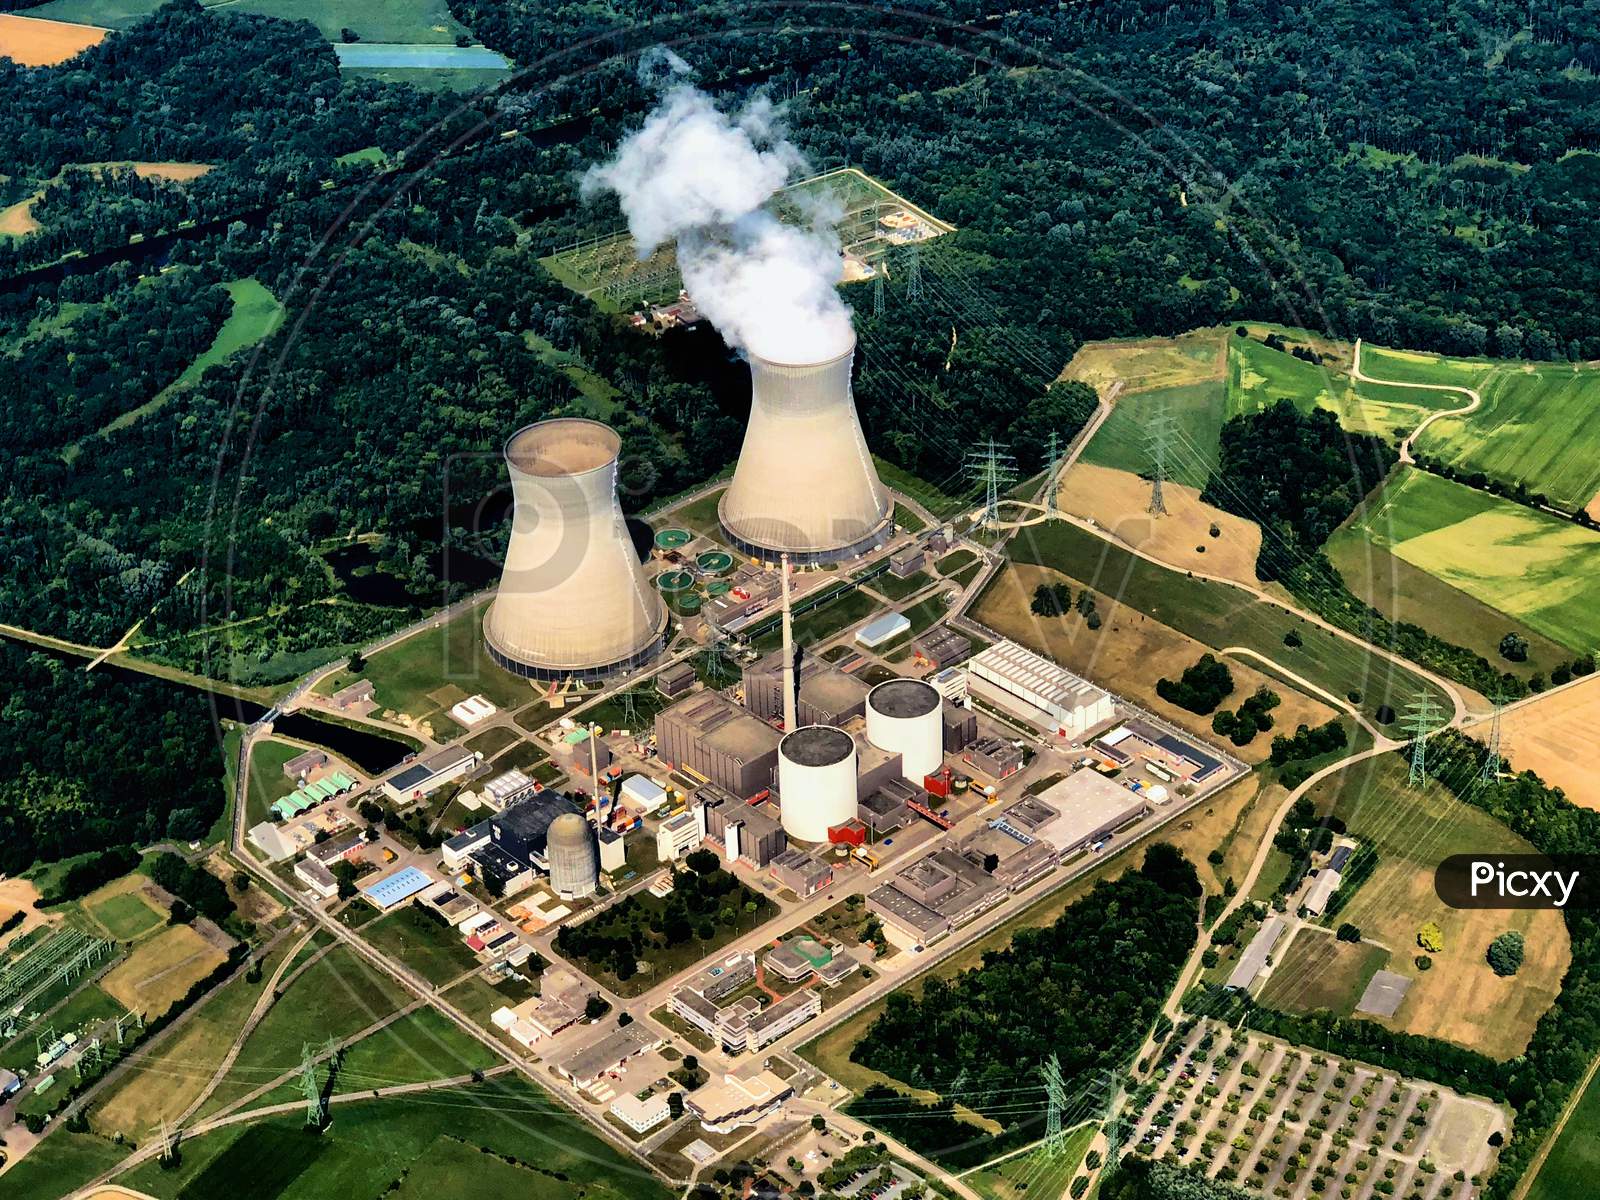 Nuclear power plant in Germany 27.7.2018